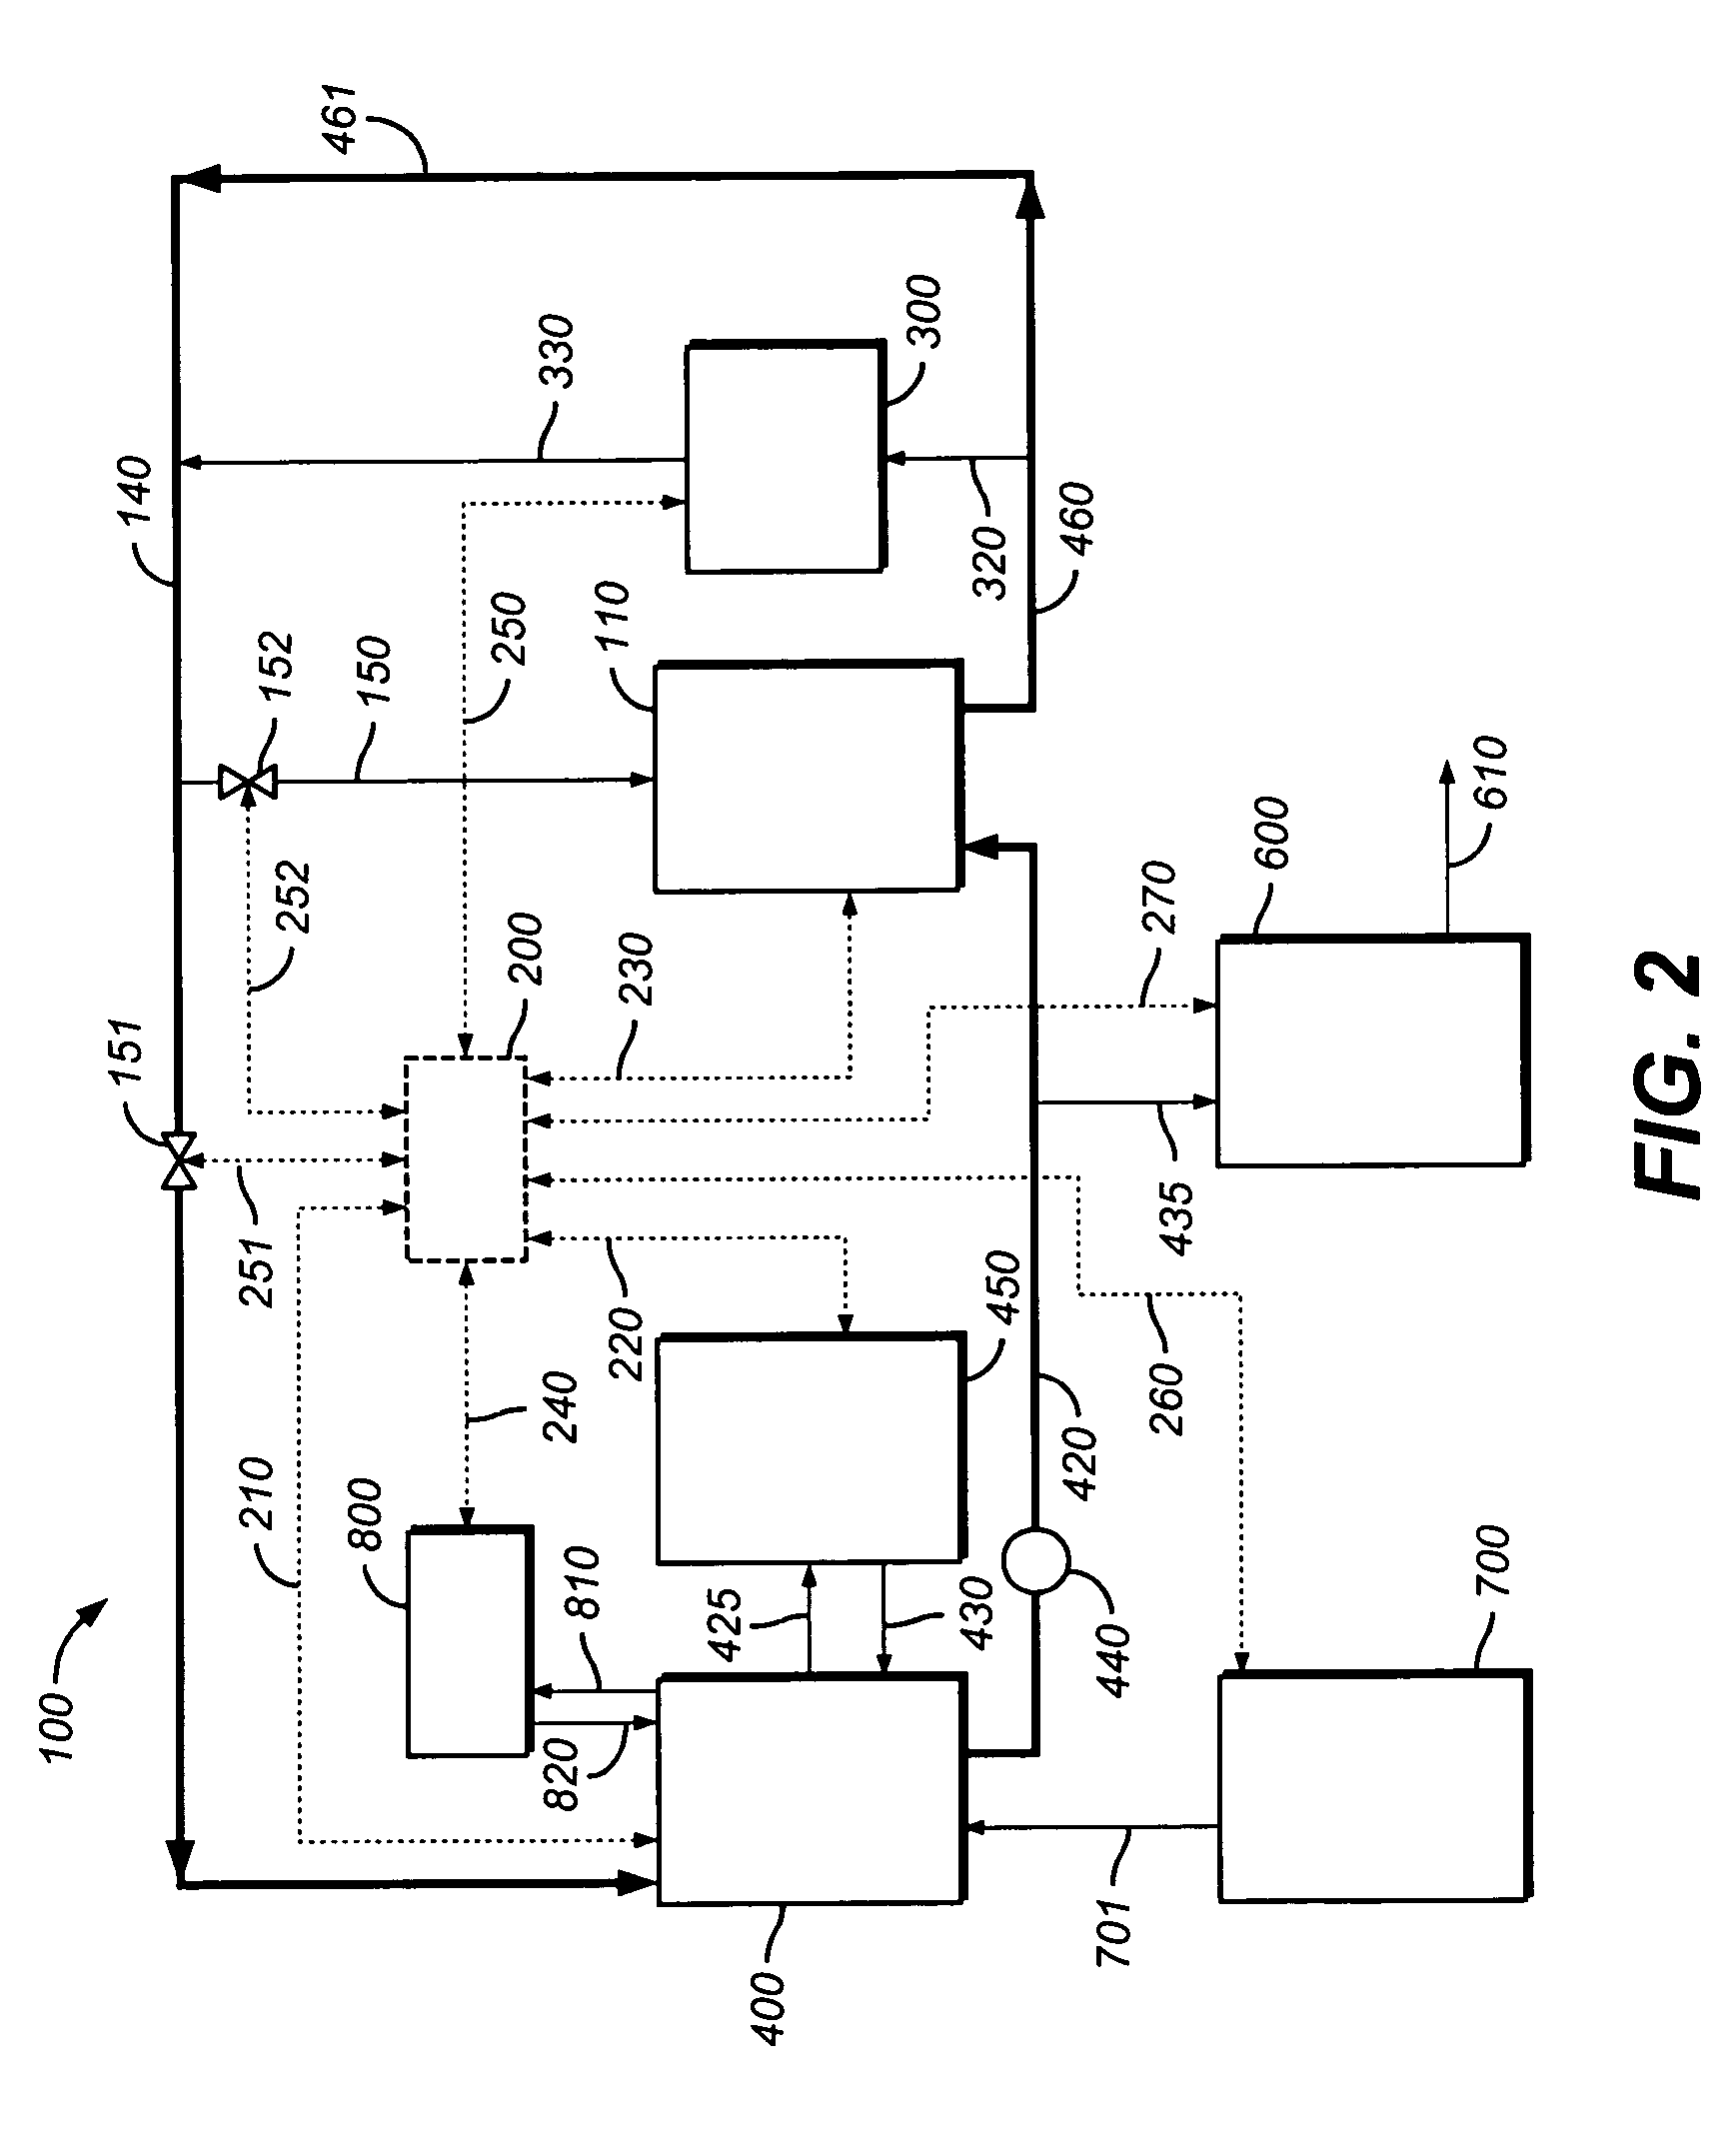 Method and apparatus for monitoring, dosing and distribution of chemical solutions